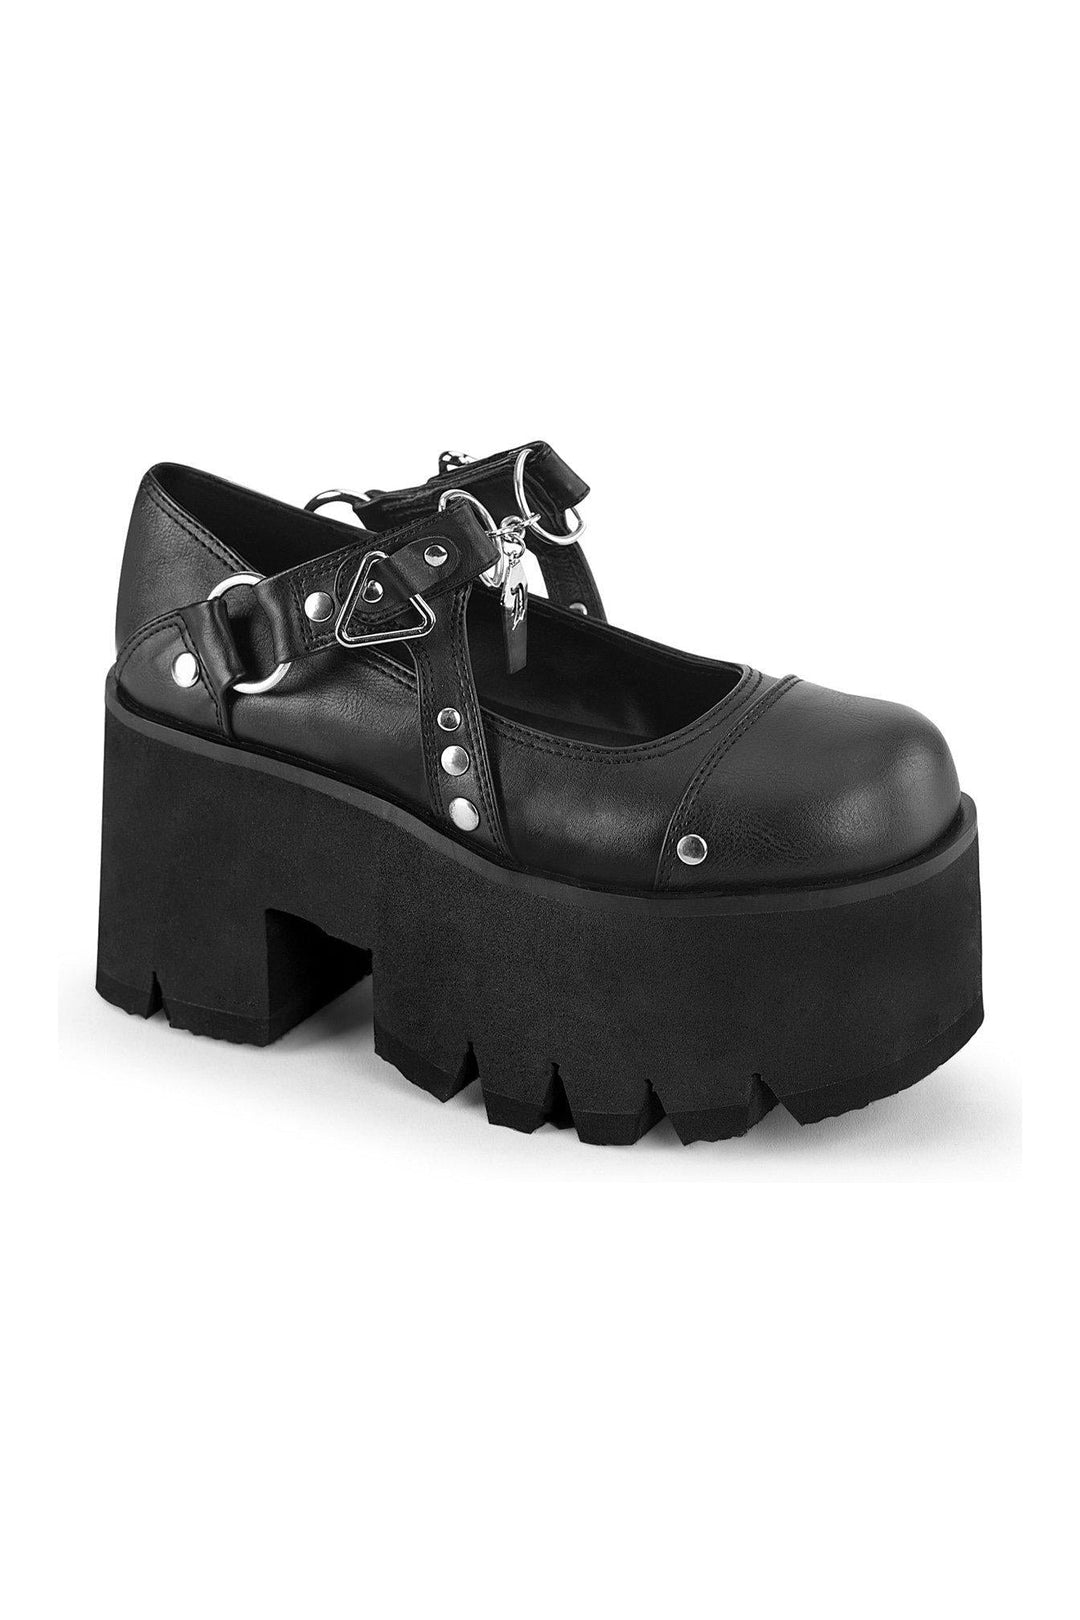 ASHES-33 Mary Jane | Black Faux Leather-Mary Janes-Demonia-SEXYSHOES.COM